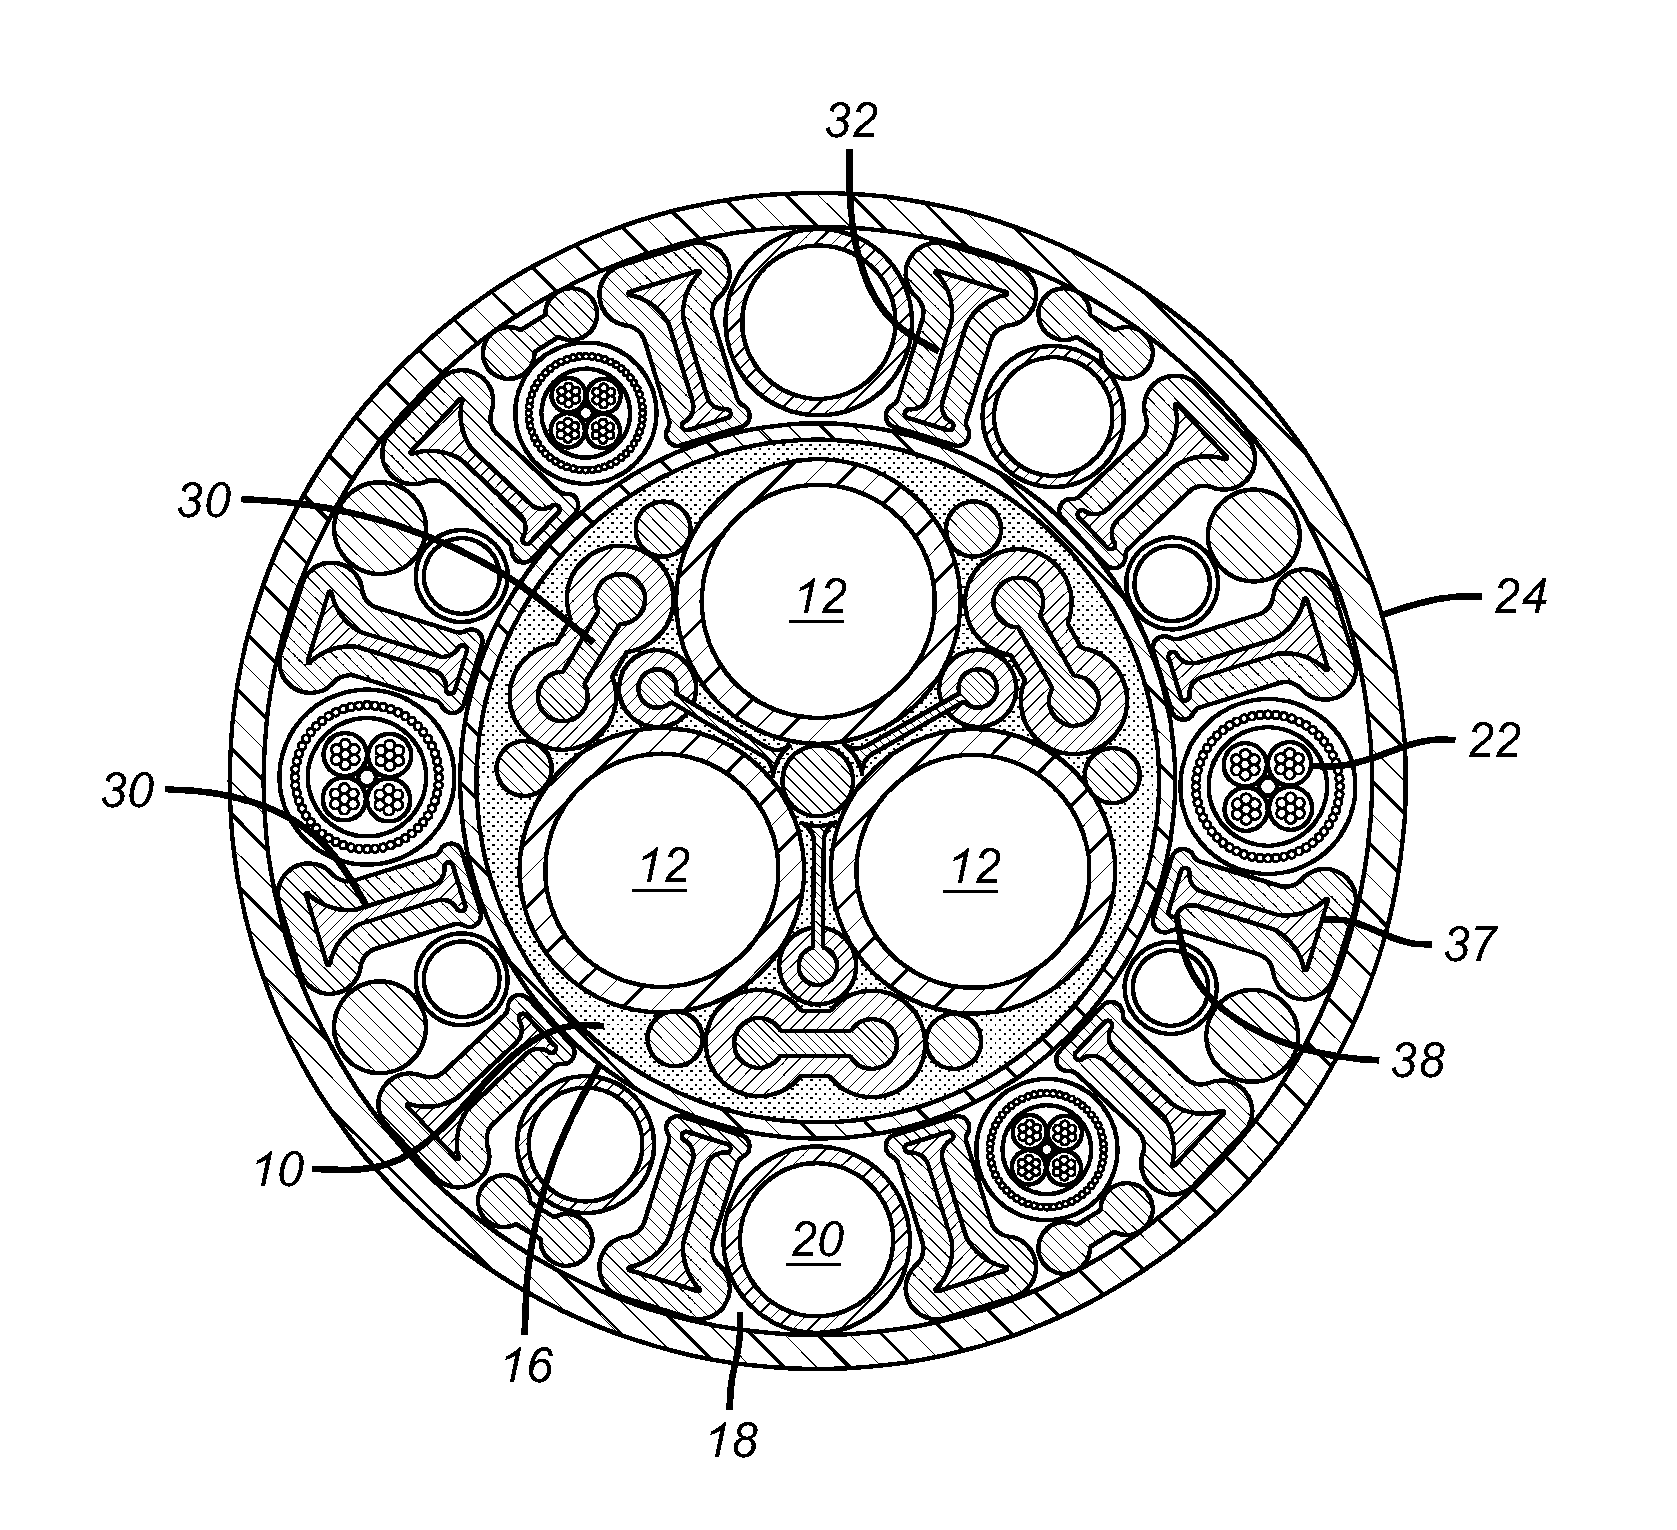 Composite fiber radial compression members in an umbilical